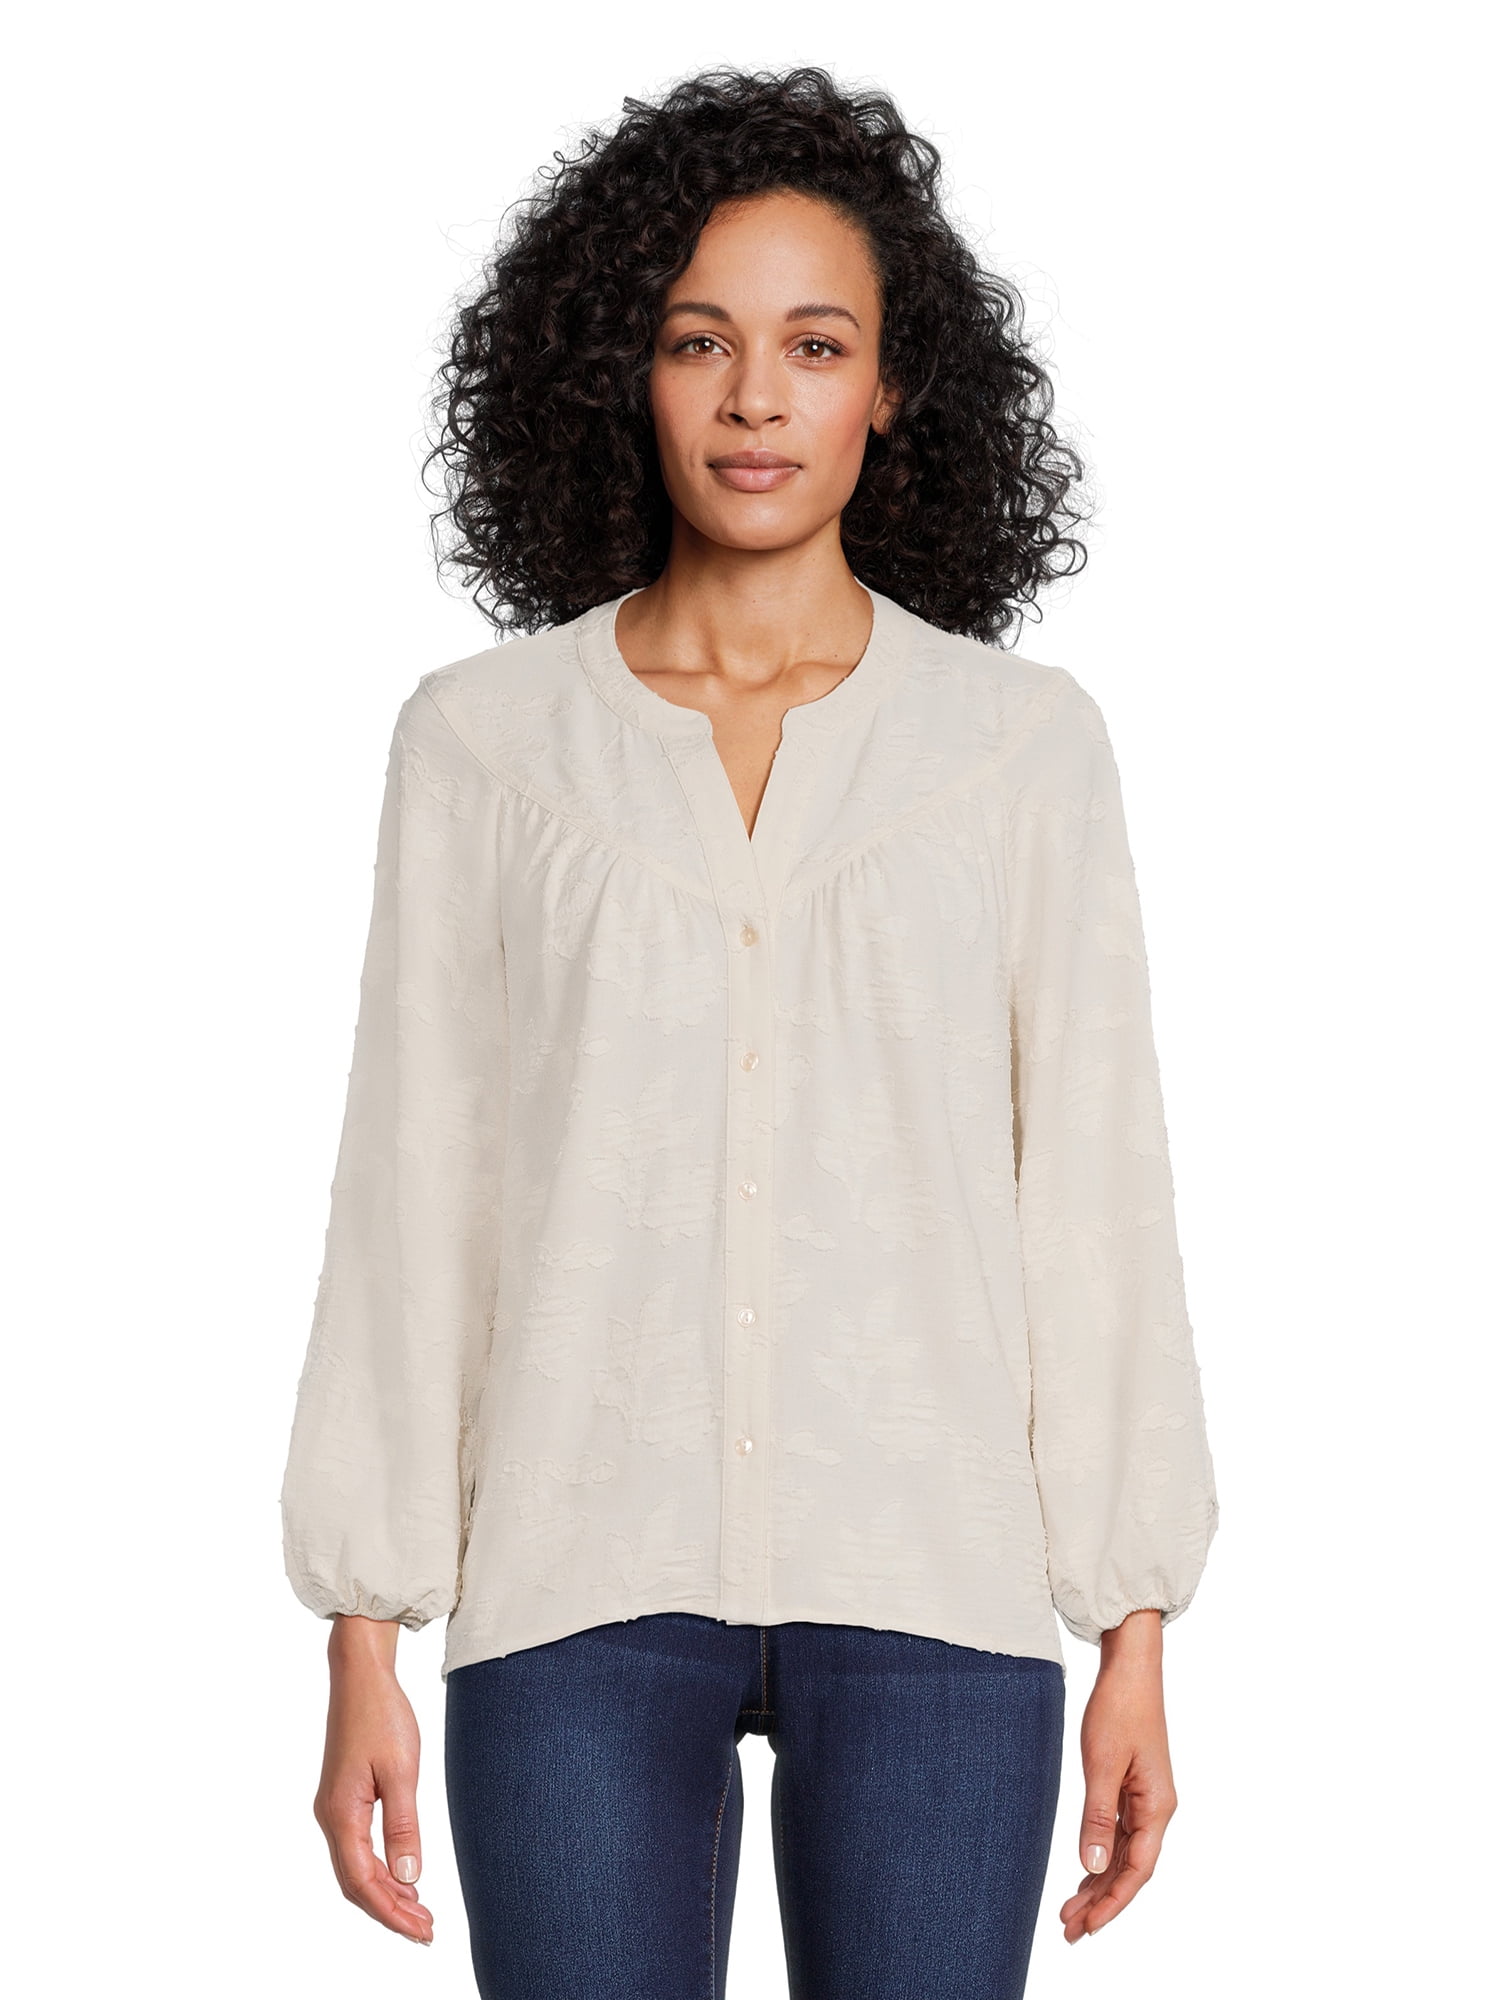 The Pioneer Woman Button Front Tunic, Women's, Sizes S-3X - Walmart.com